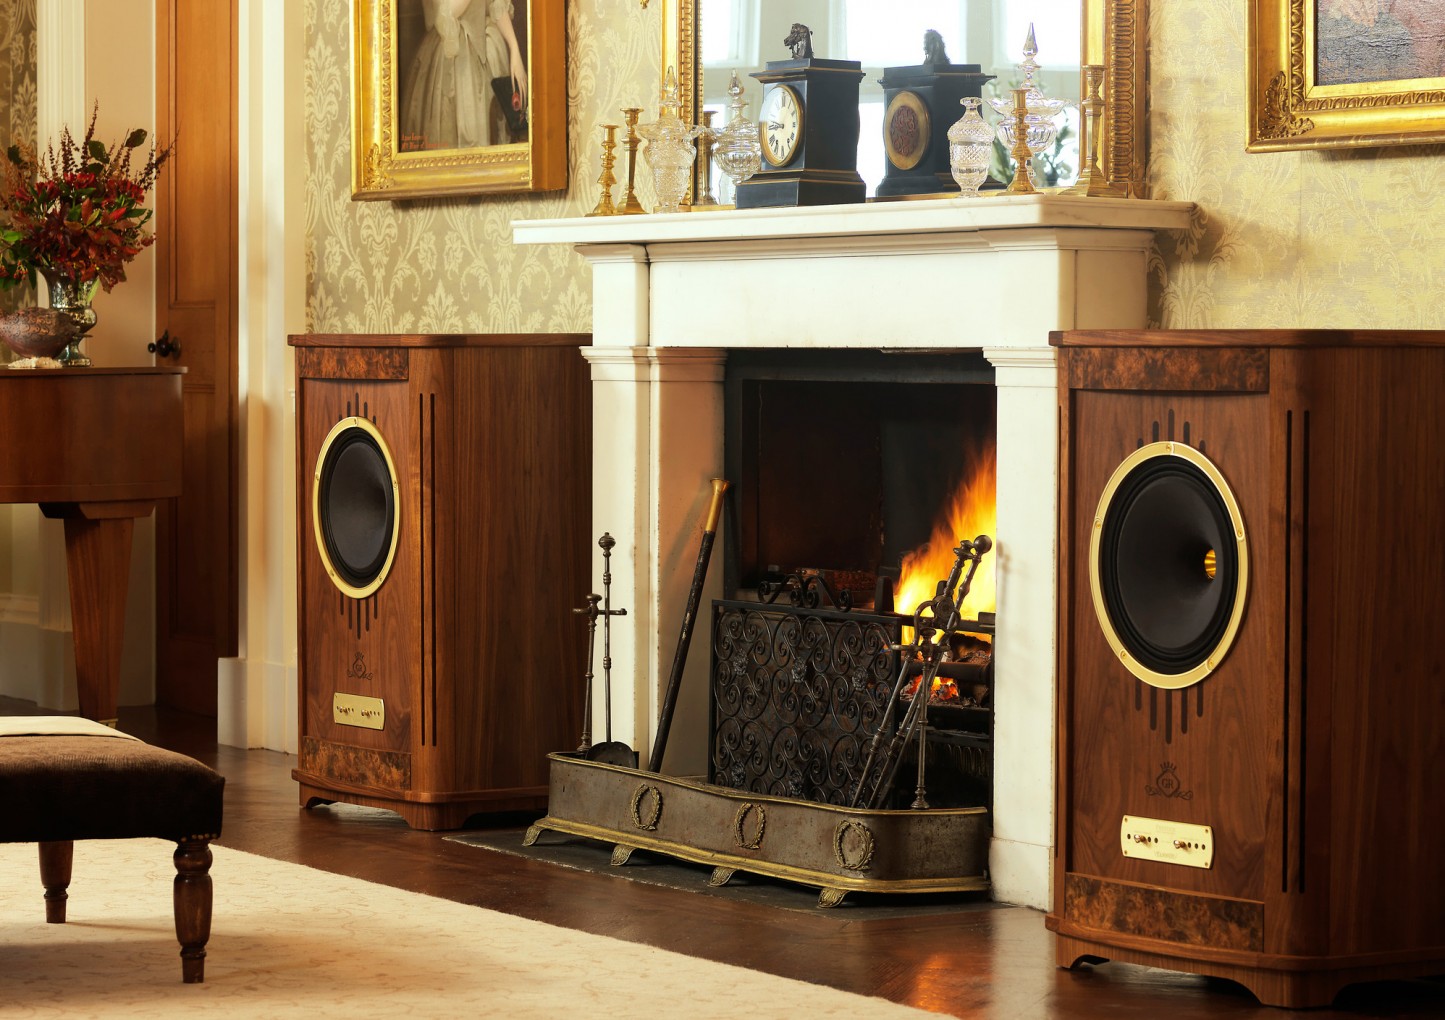 Tannoy-Canterburry-Image-1